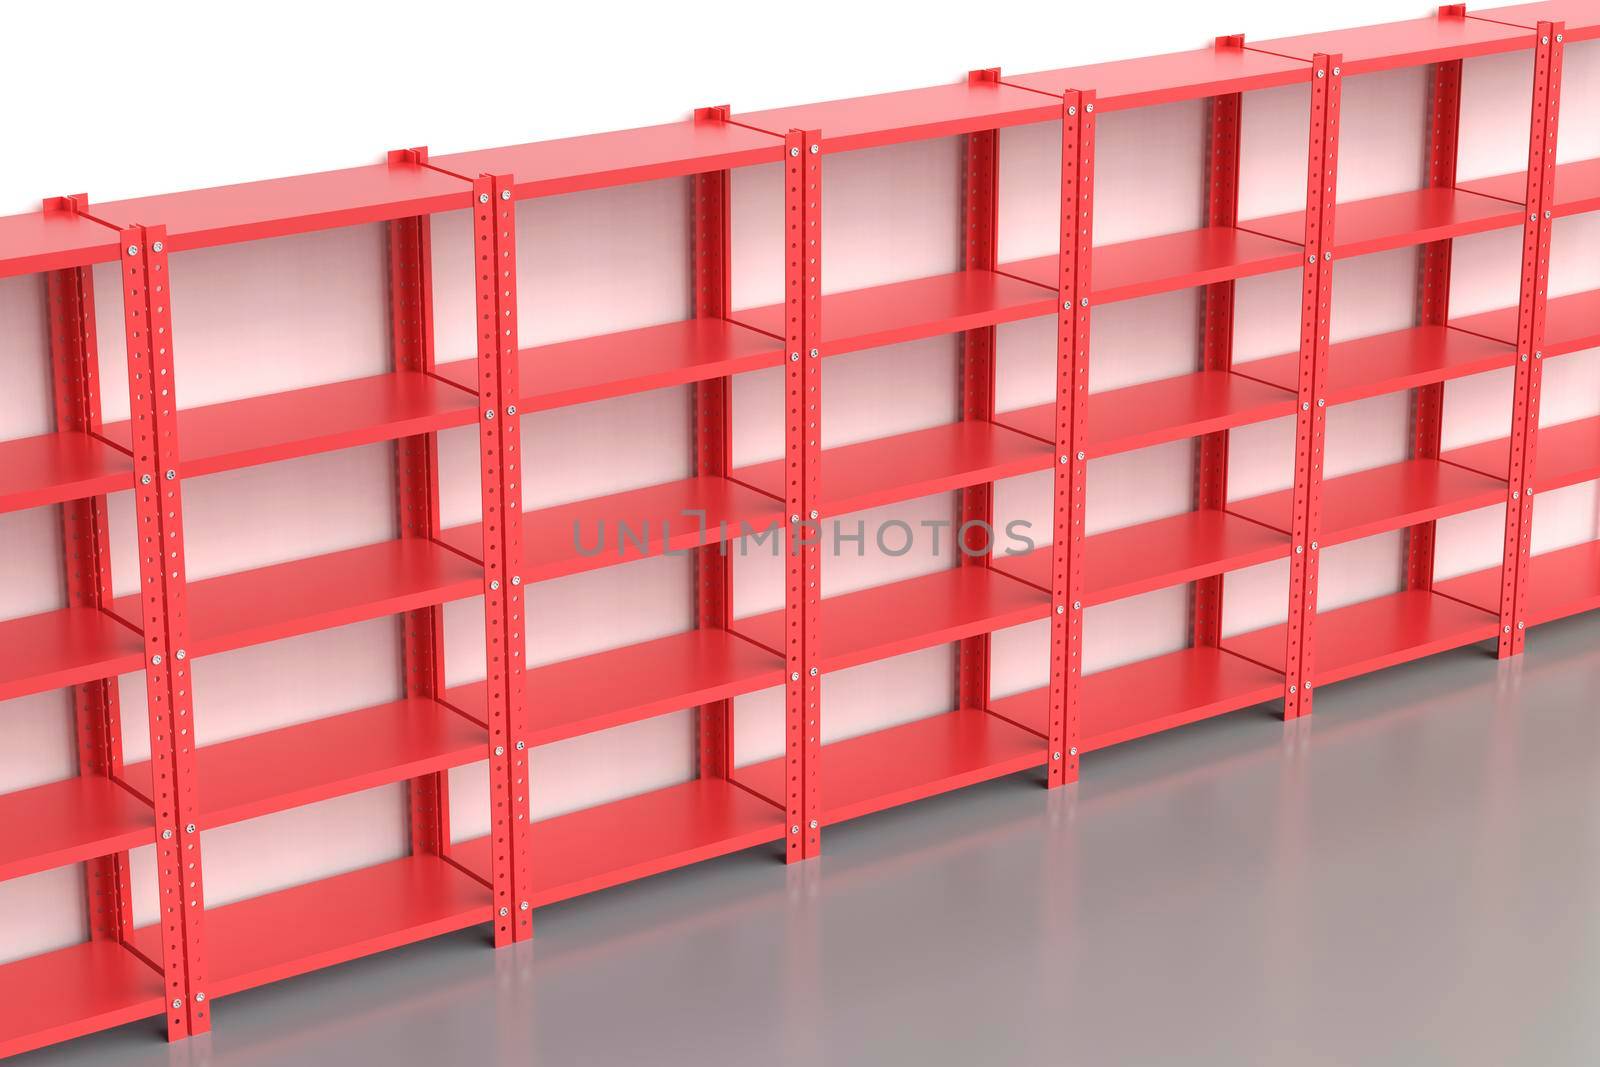 Metal shelving units by magraphics